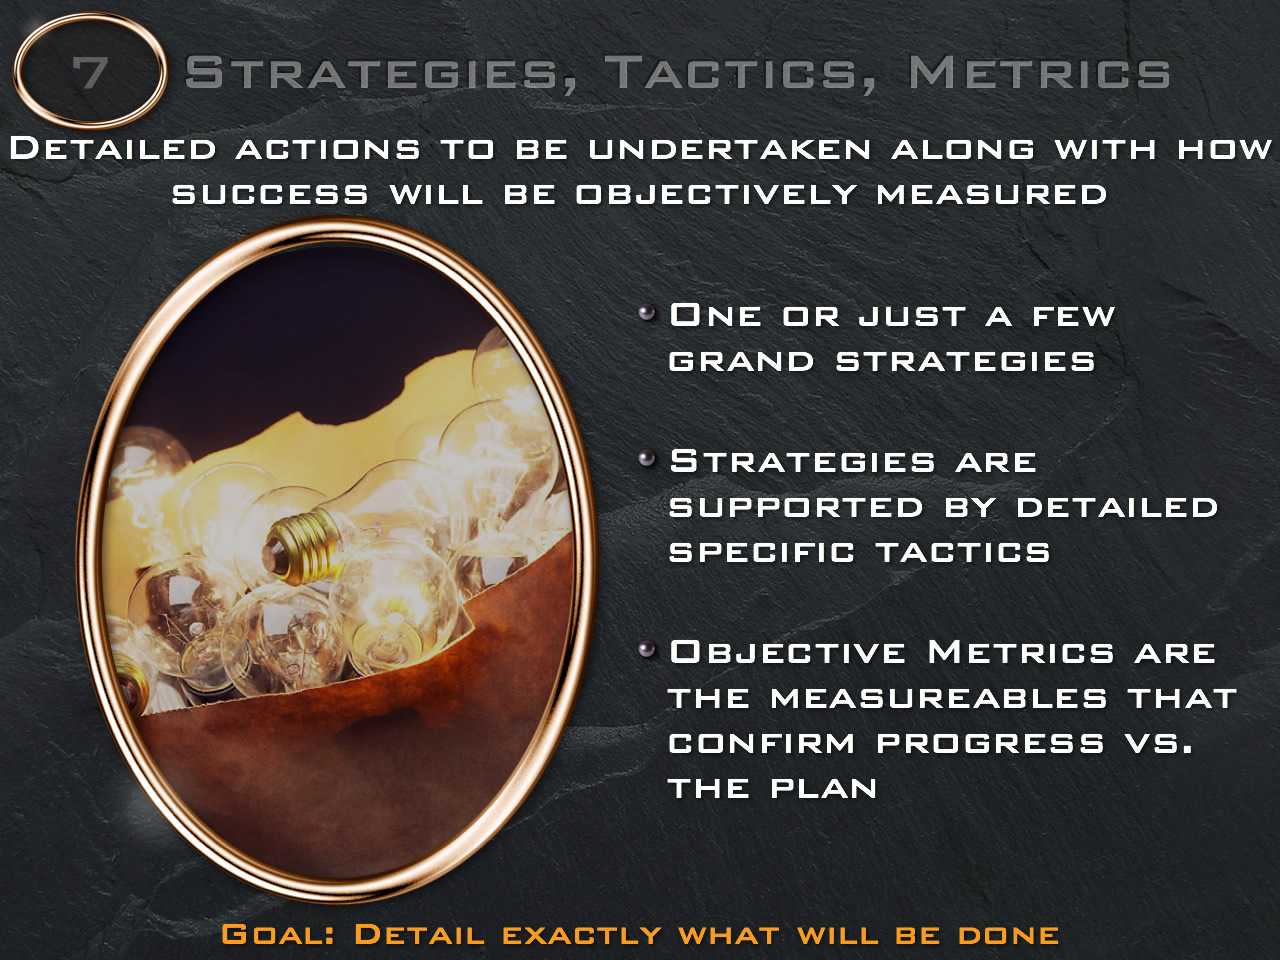 Defining the strategics, tactics and metrics in your new strategic business plan